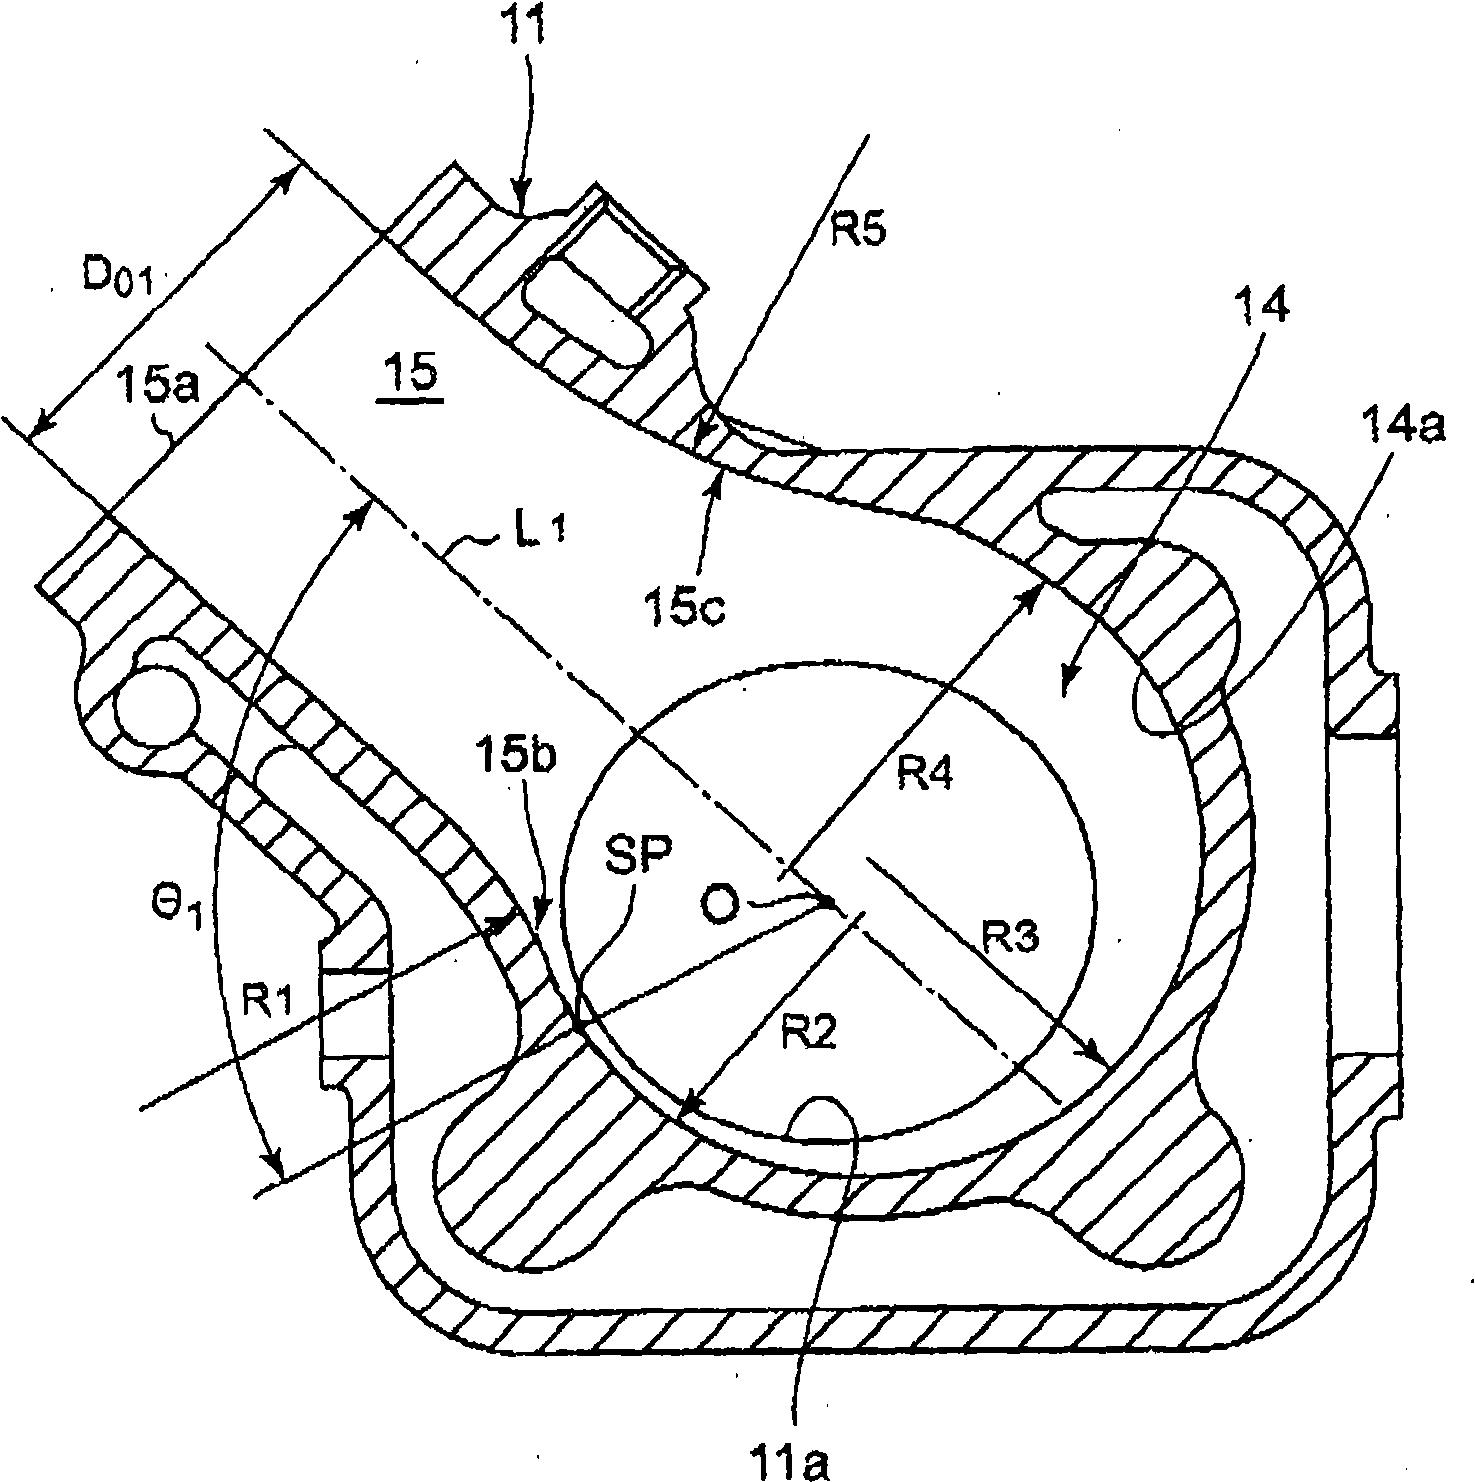 Structure of exhaust gas separation device of internal combustion engine